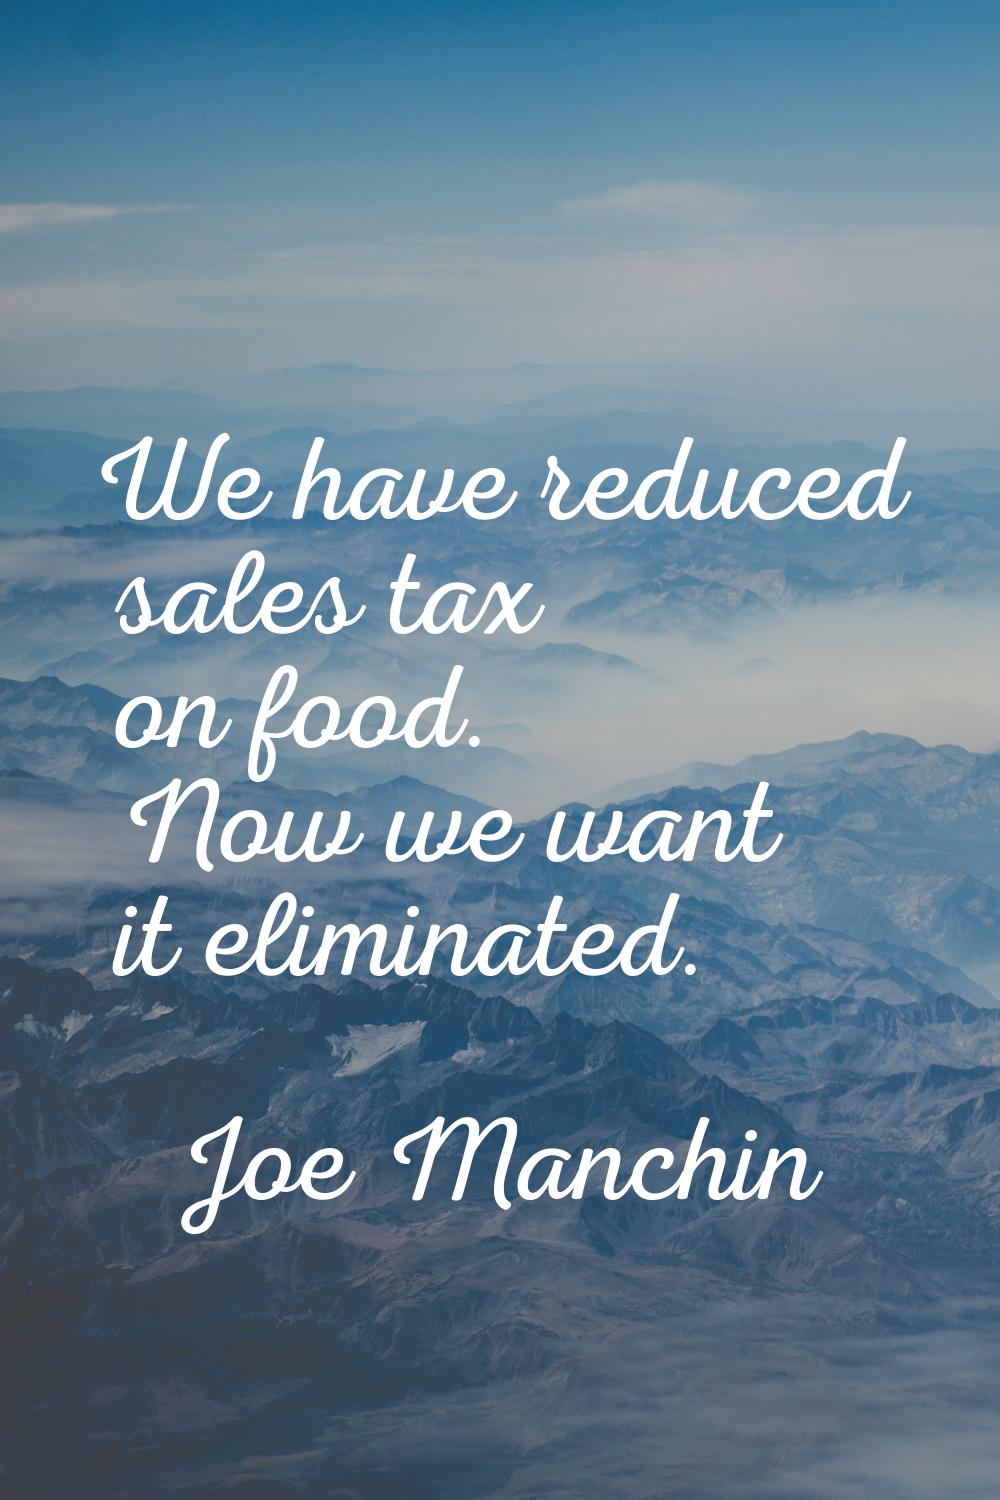 We have reduced sales tax on food. Now we want it eliminated.